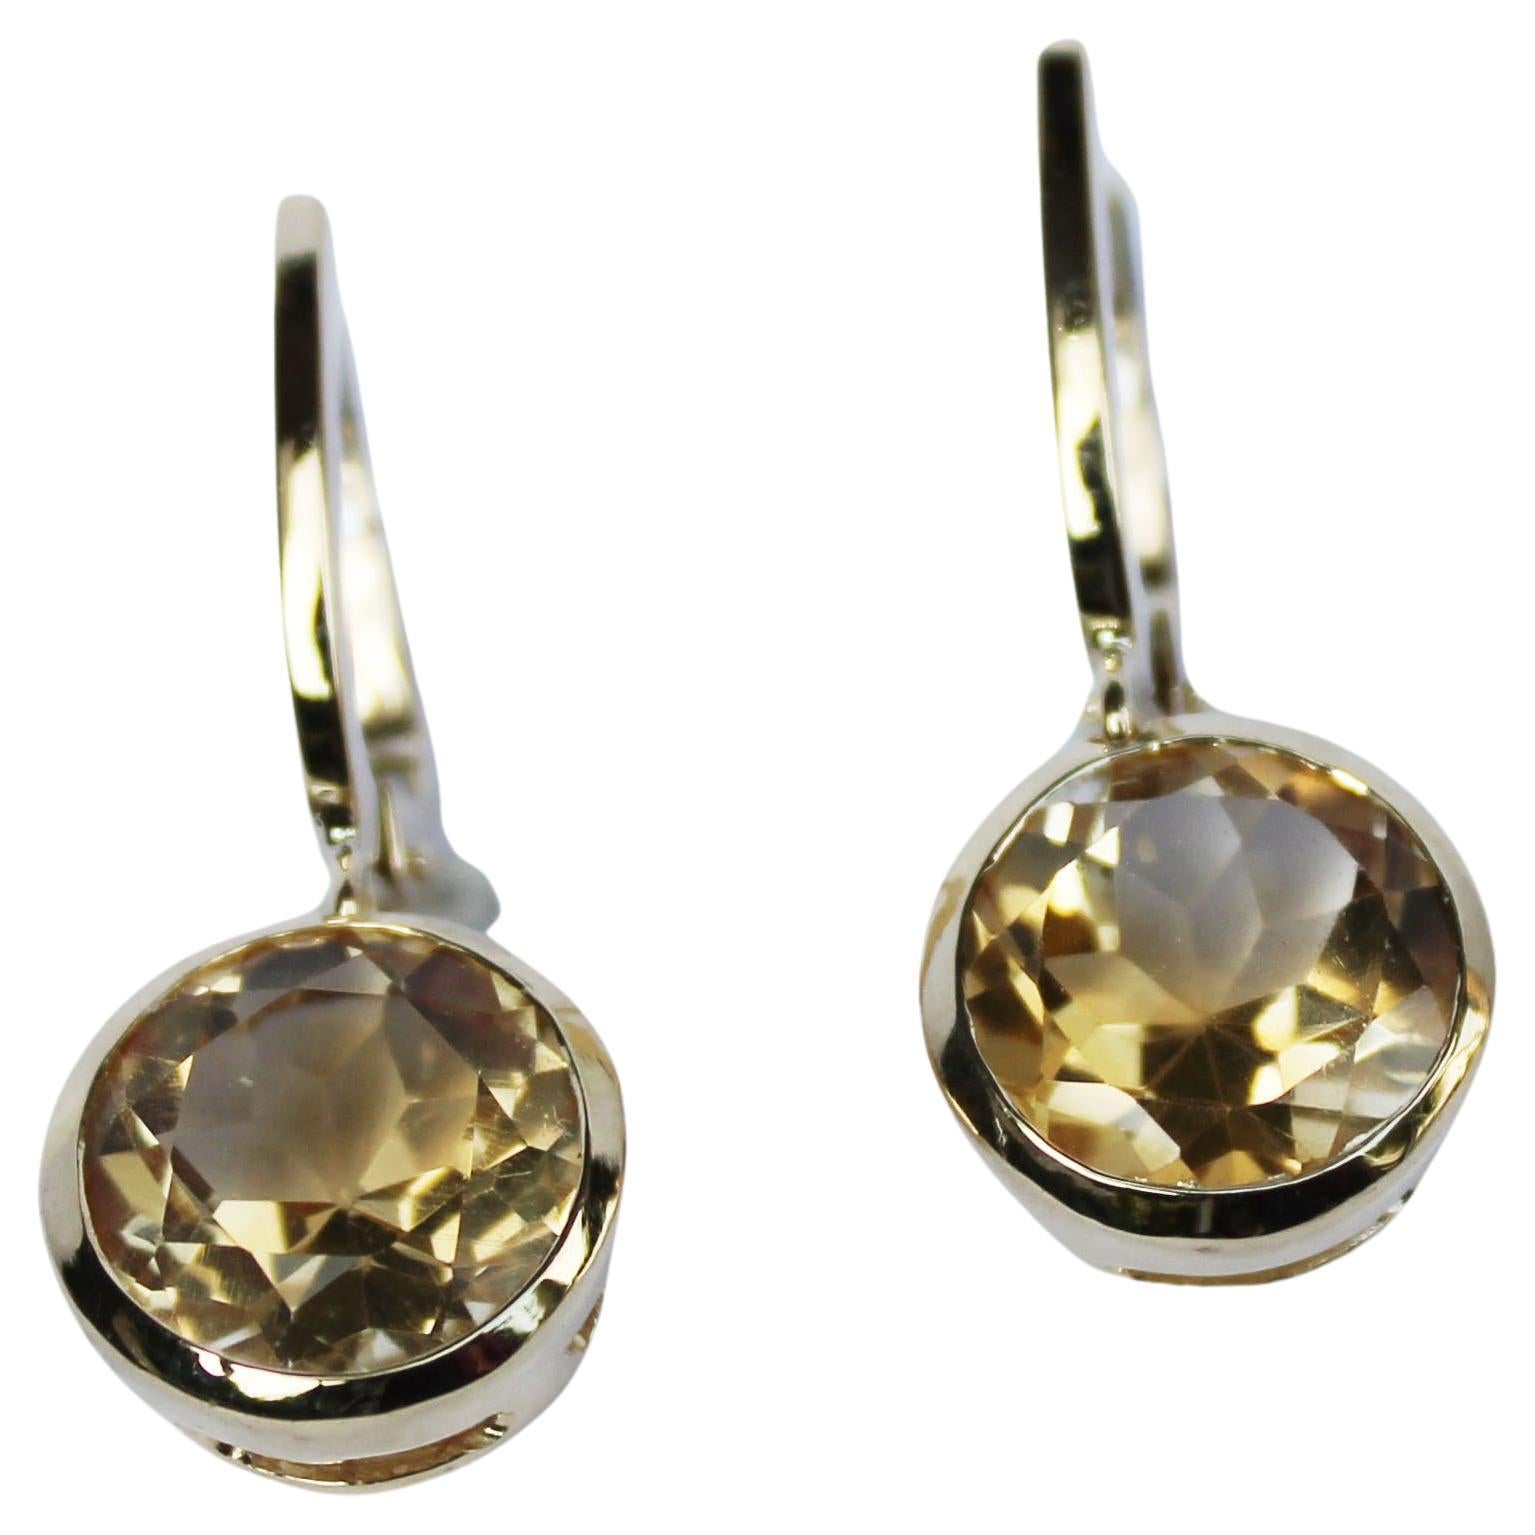 Earrings in yellow gold 18 Karat with Citrine (round cut, size: mm)

All Stanoppi Jewelry is new and has never been previously owned or worn. Each item will arrive at your door beautifully gift wrapped in Stanoppi boxes, put inside an elegant pouch